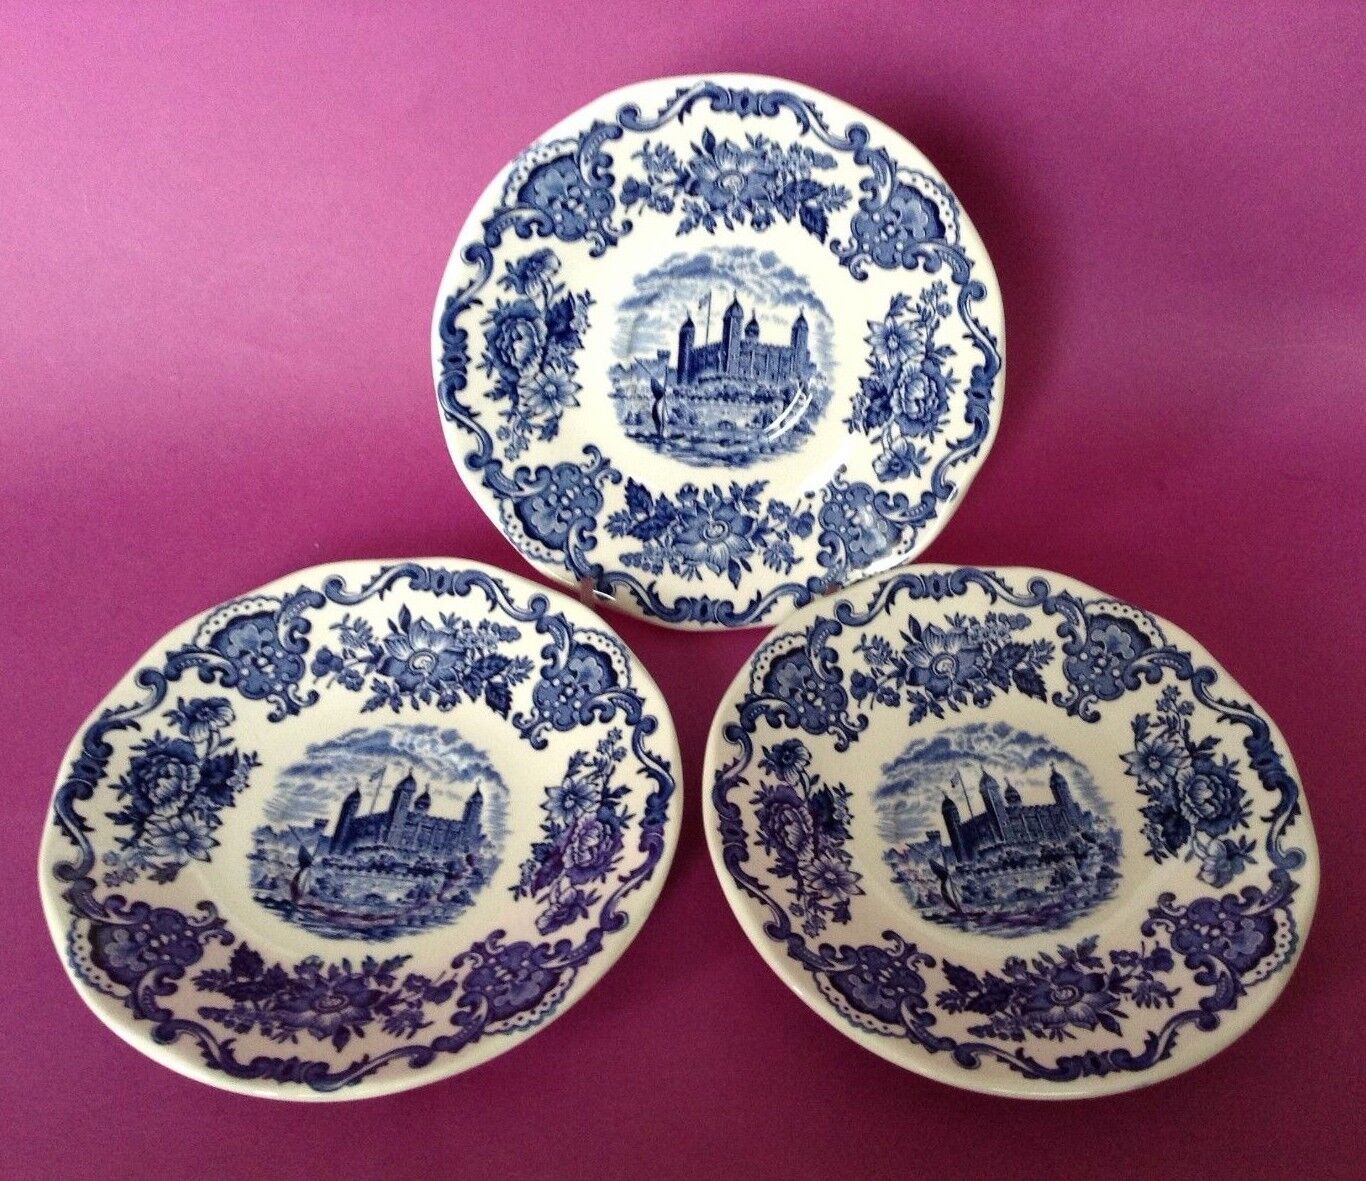 Wedgwood - Royal Homes Of Britain - 3 Saucers - Blue And White Transferware